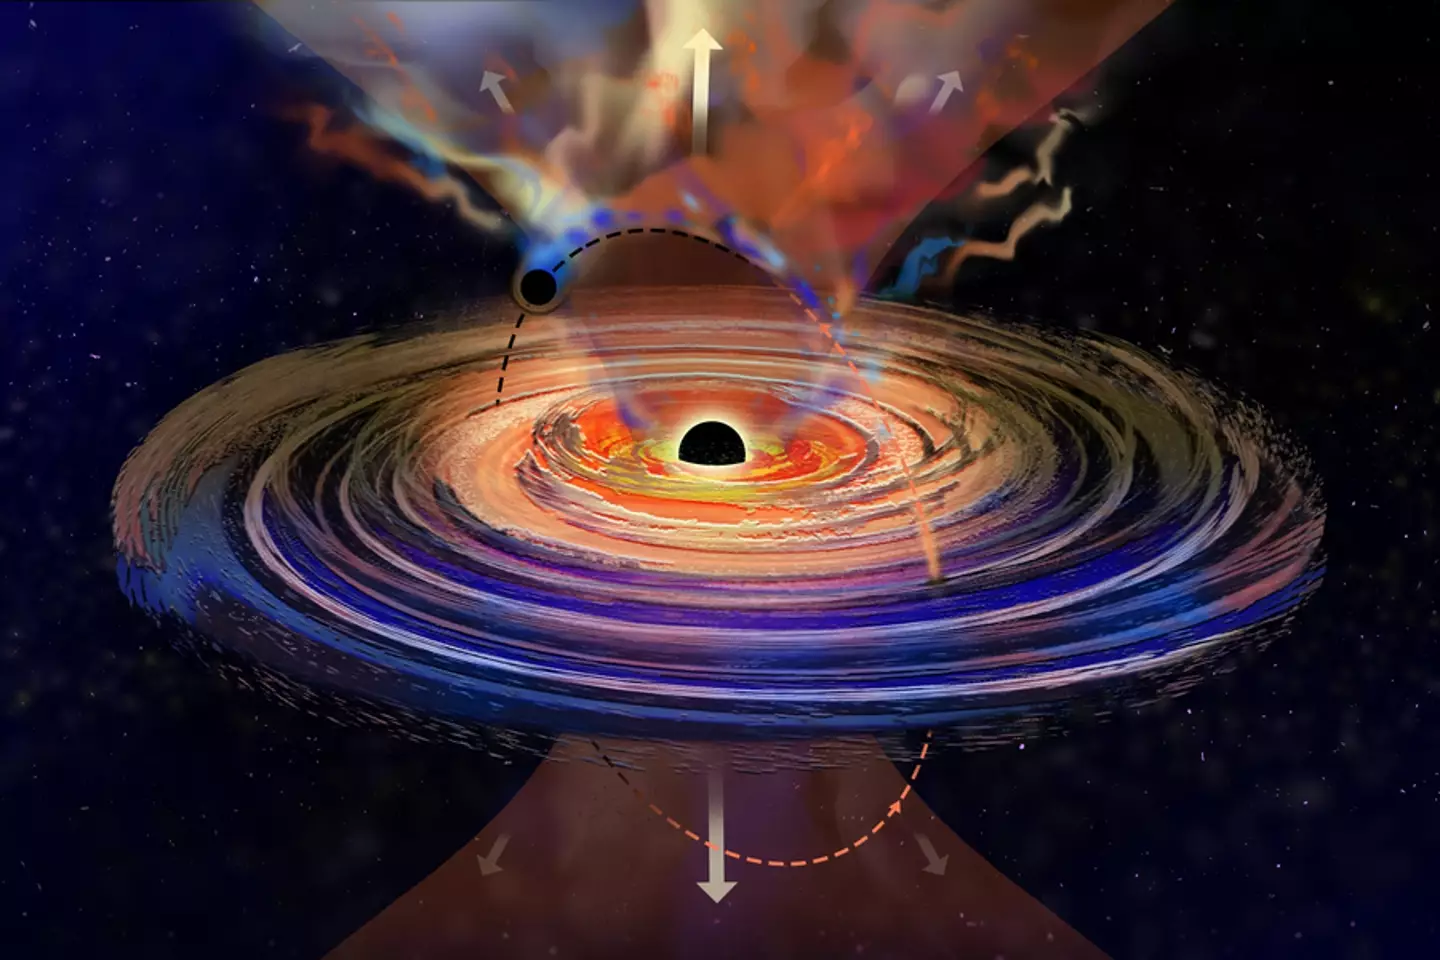 Scientists have found a large black hole that 'hiccups'.